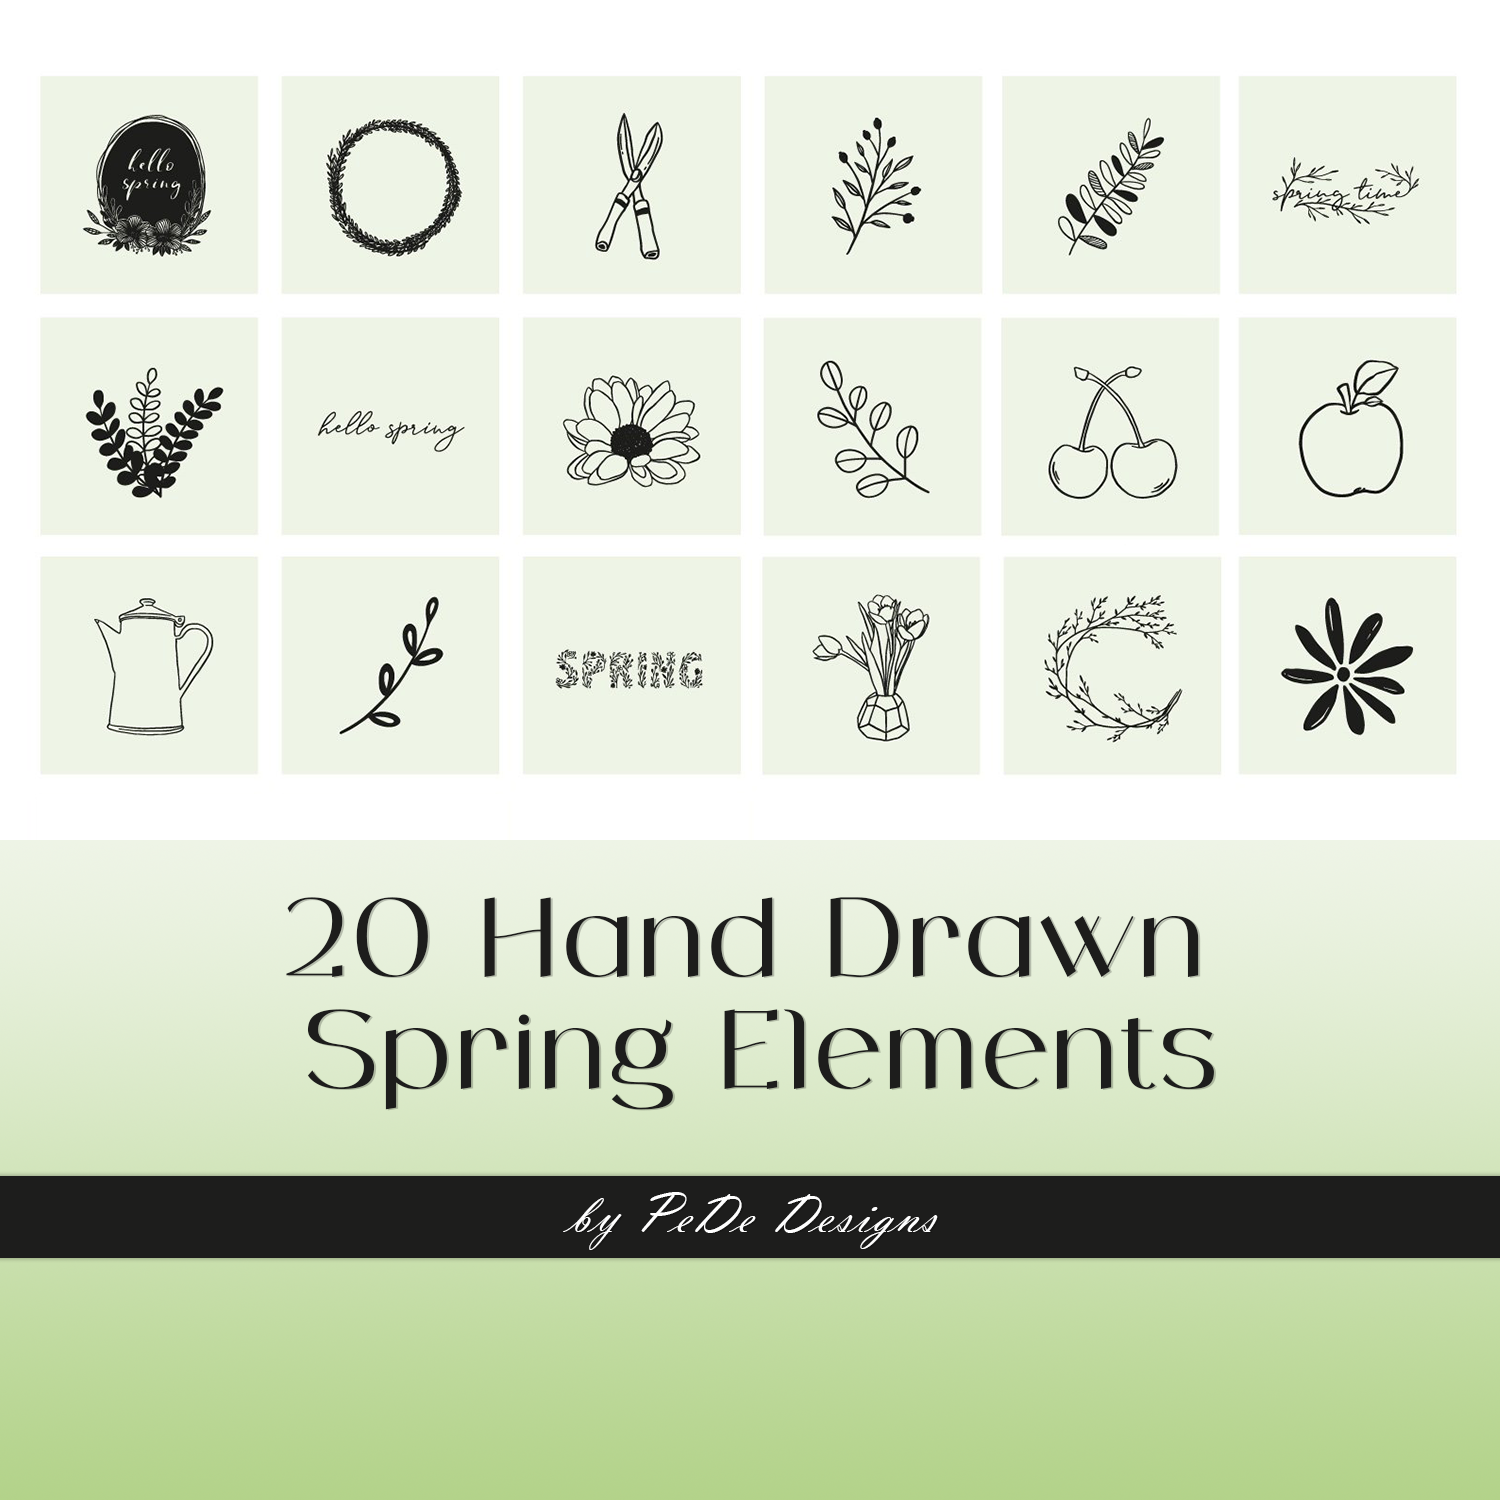 20 Hand Drawn Spring Elements cover.